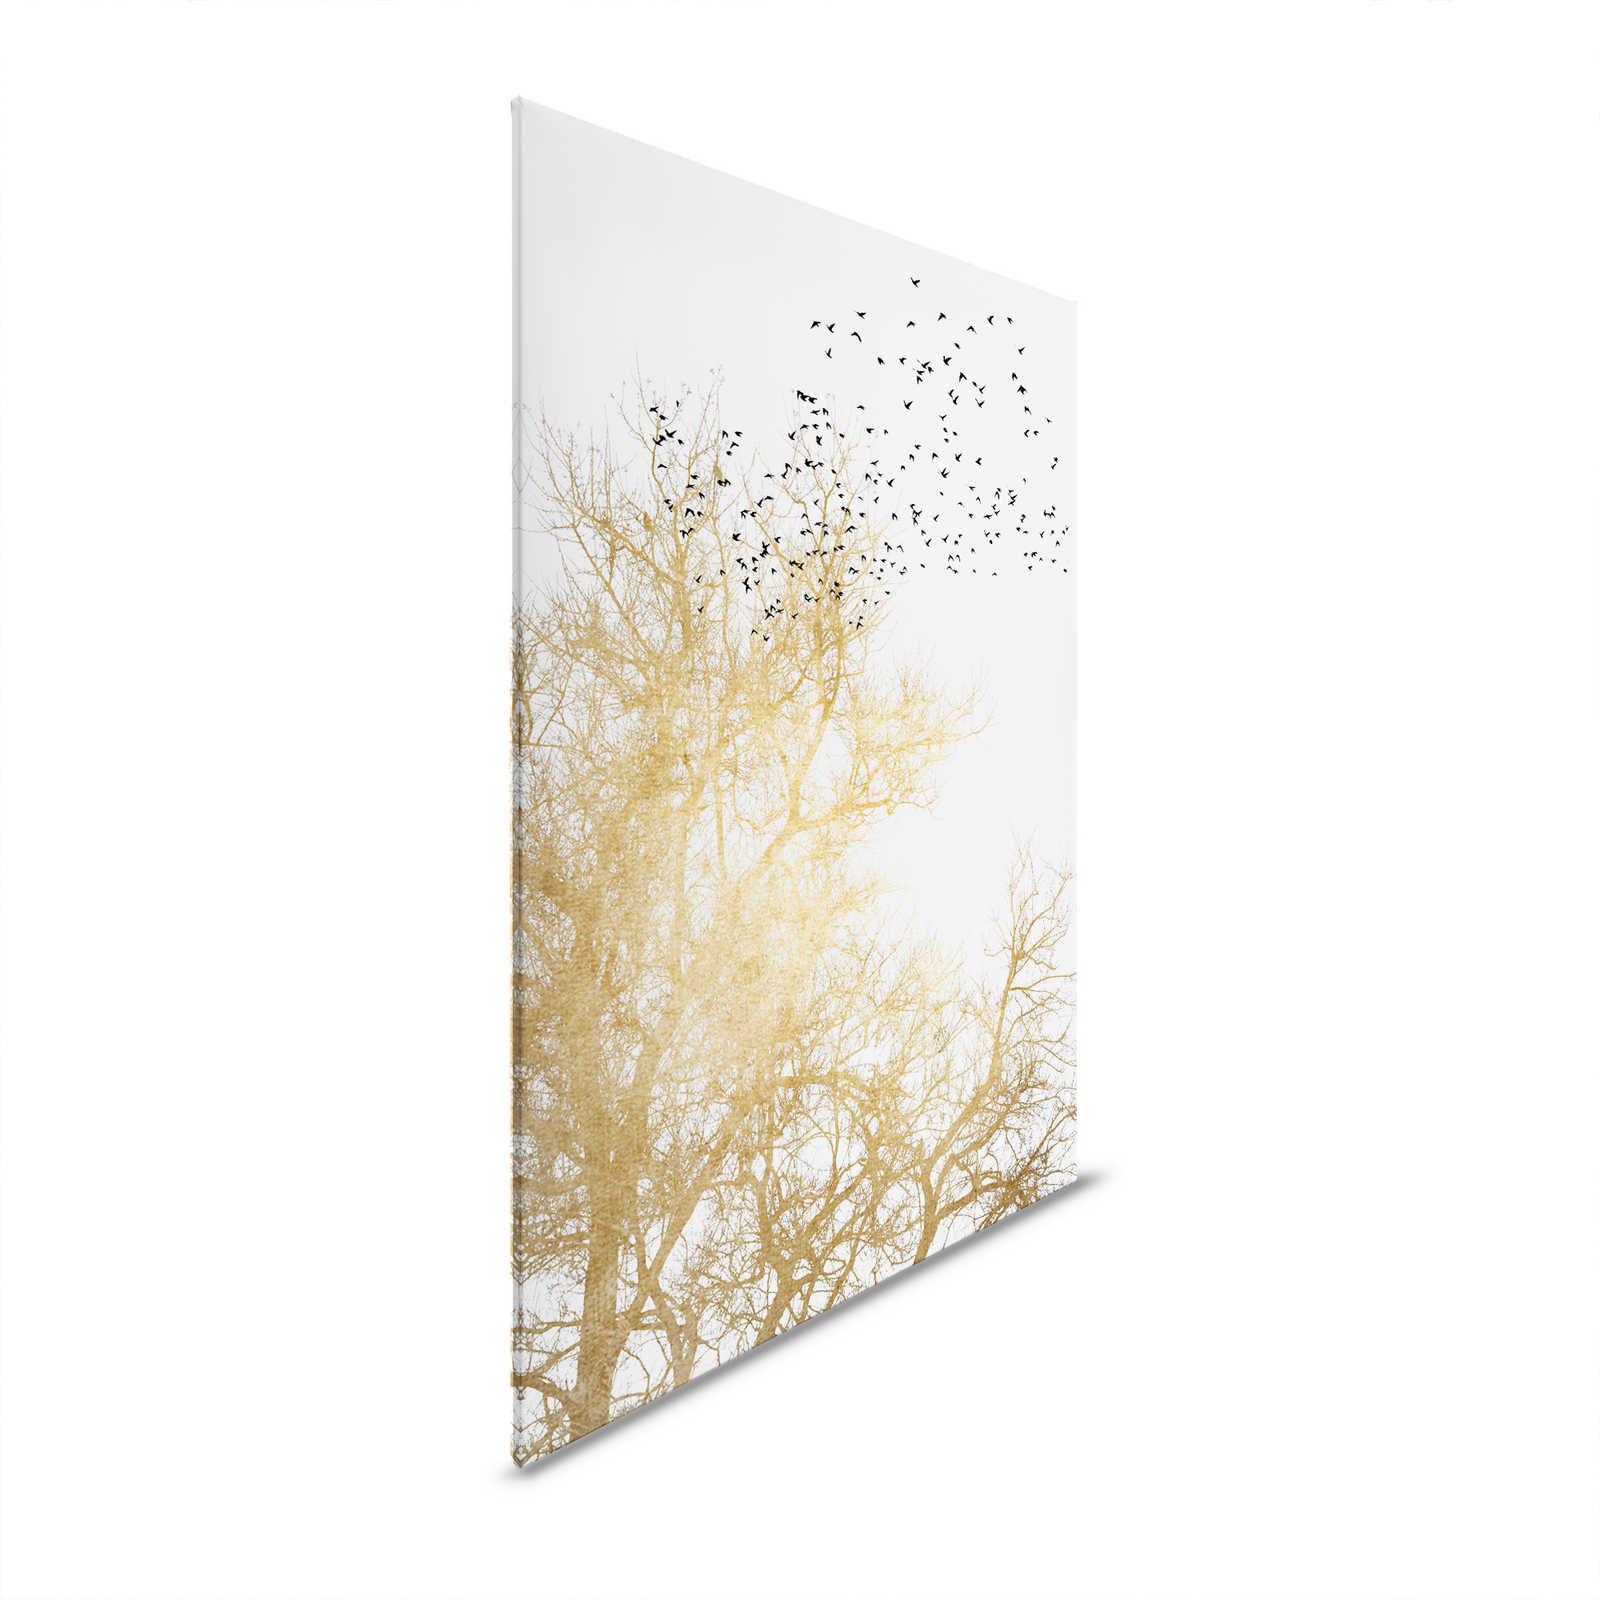 Canvas painting with golden trees and flock of birds - 1.20 m x 0.80 m
